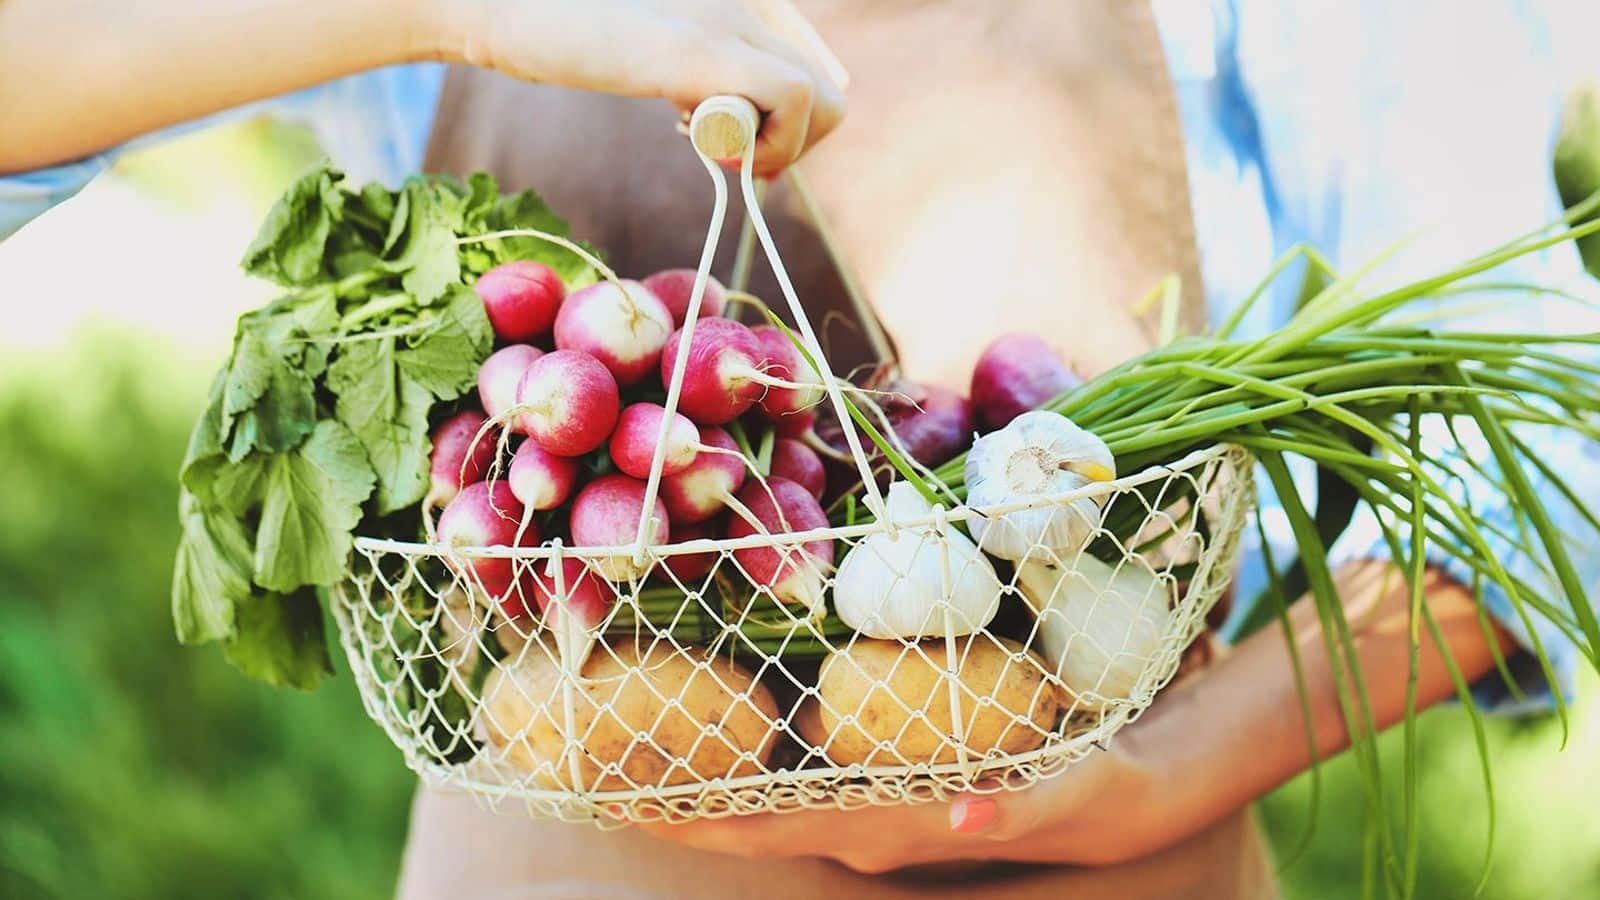 Nourish your gut with these root veggies